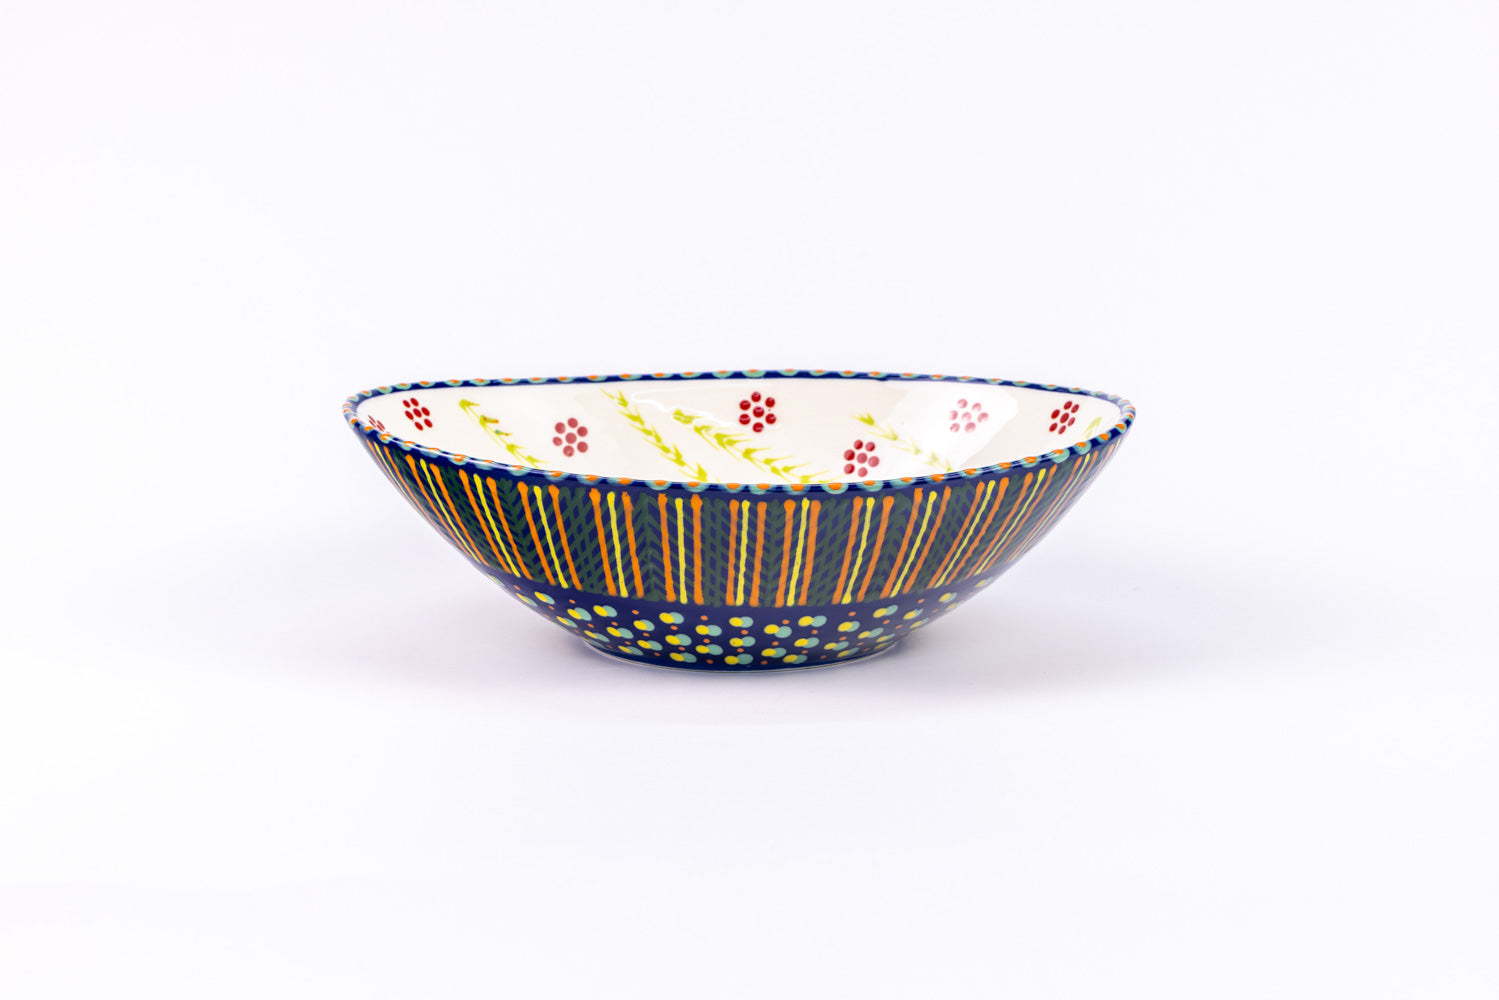 Oval ceramic serving bowl with indigo blue base color. Orange, yellow, and green dots & stripes on top. Inside is white with red 'dot ' flowers and yellow stripe design. Very lovely and fairly traded!